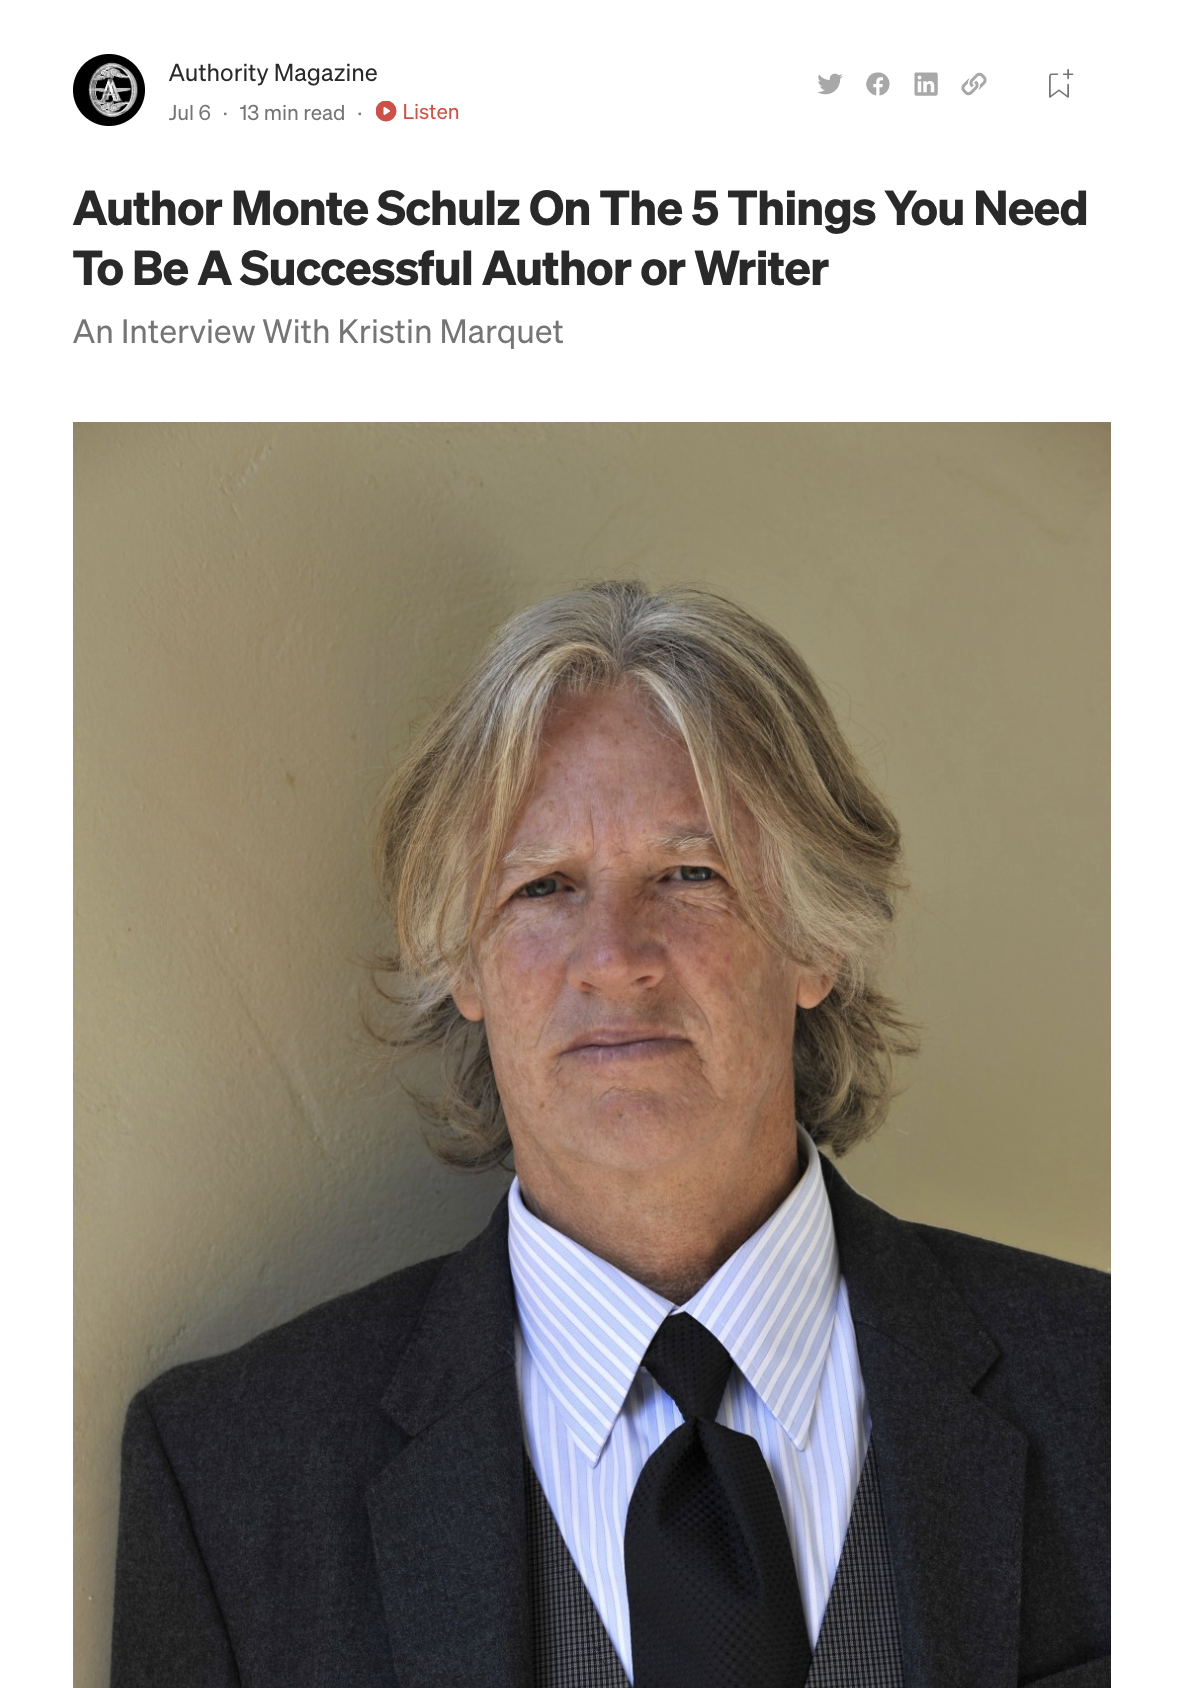 Author Monte Schulz On The 5 Things You Need To Be A Successful Author or Writer An Interview With Kristin Marquet